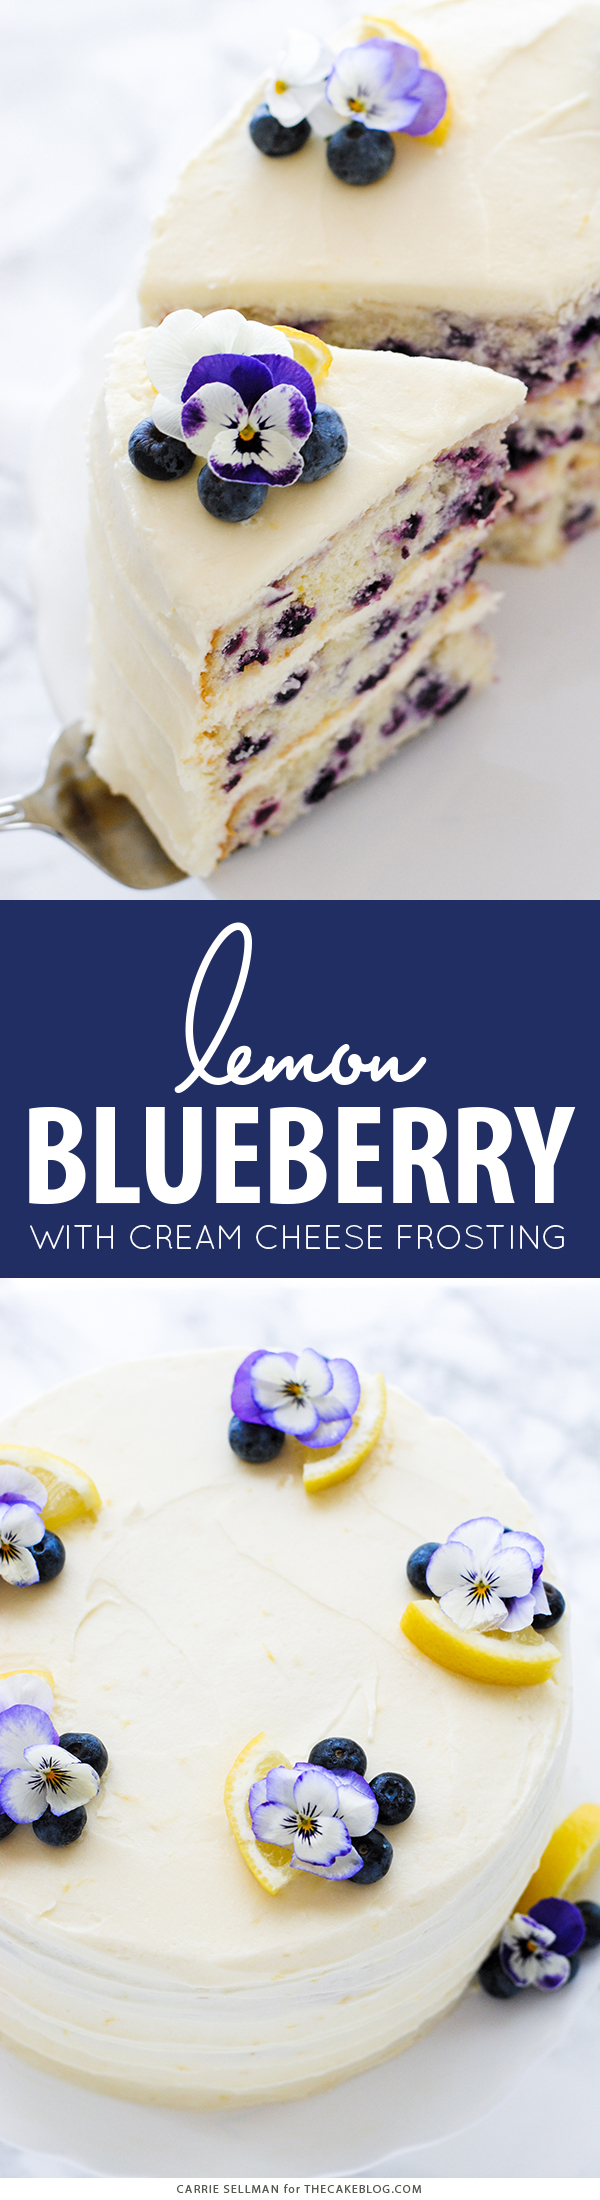 Lemon Blueberry Cake - lemon cake studded with wild blueberries, topped with lemon cream cheese frosting | by Carrie Sellman for TheCakeBlog.com